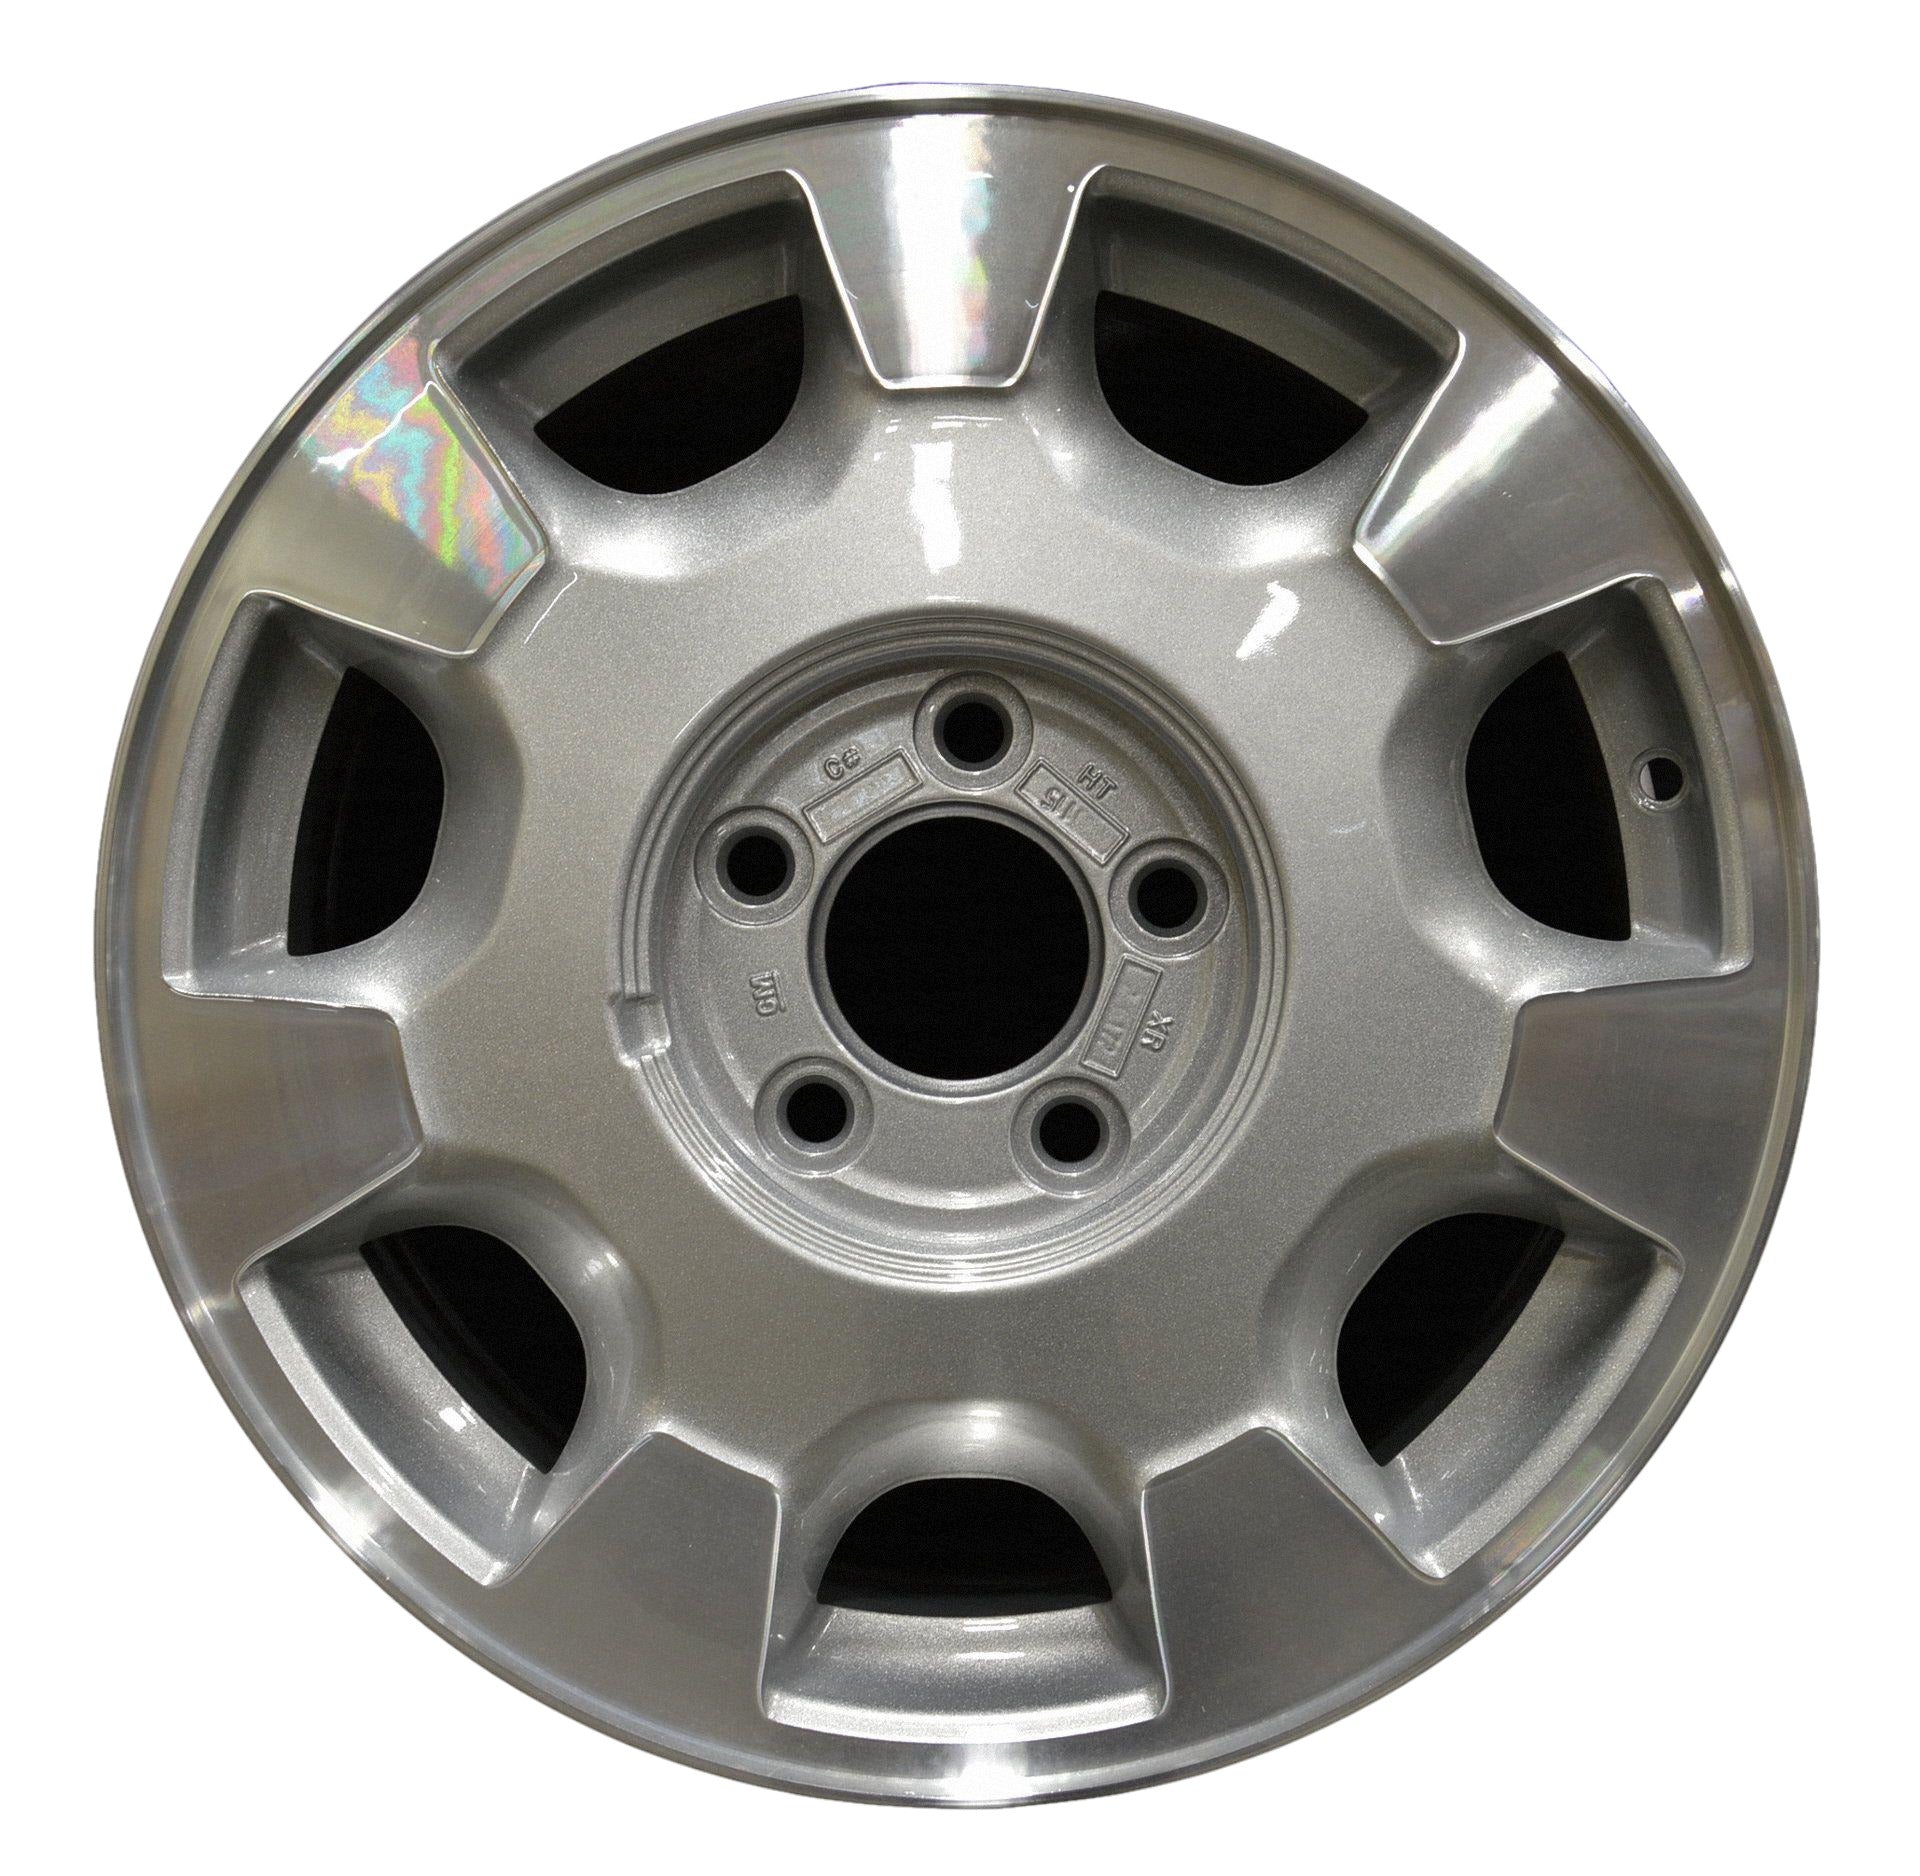 Cadillac Deville  2000, 2001, 2002 Factory OEM Car Wheel Size 16x7 Alloy WAO.4549.PS08.FC